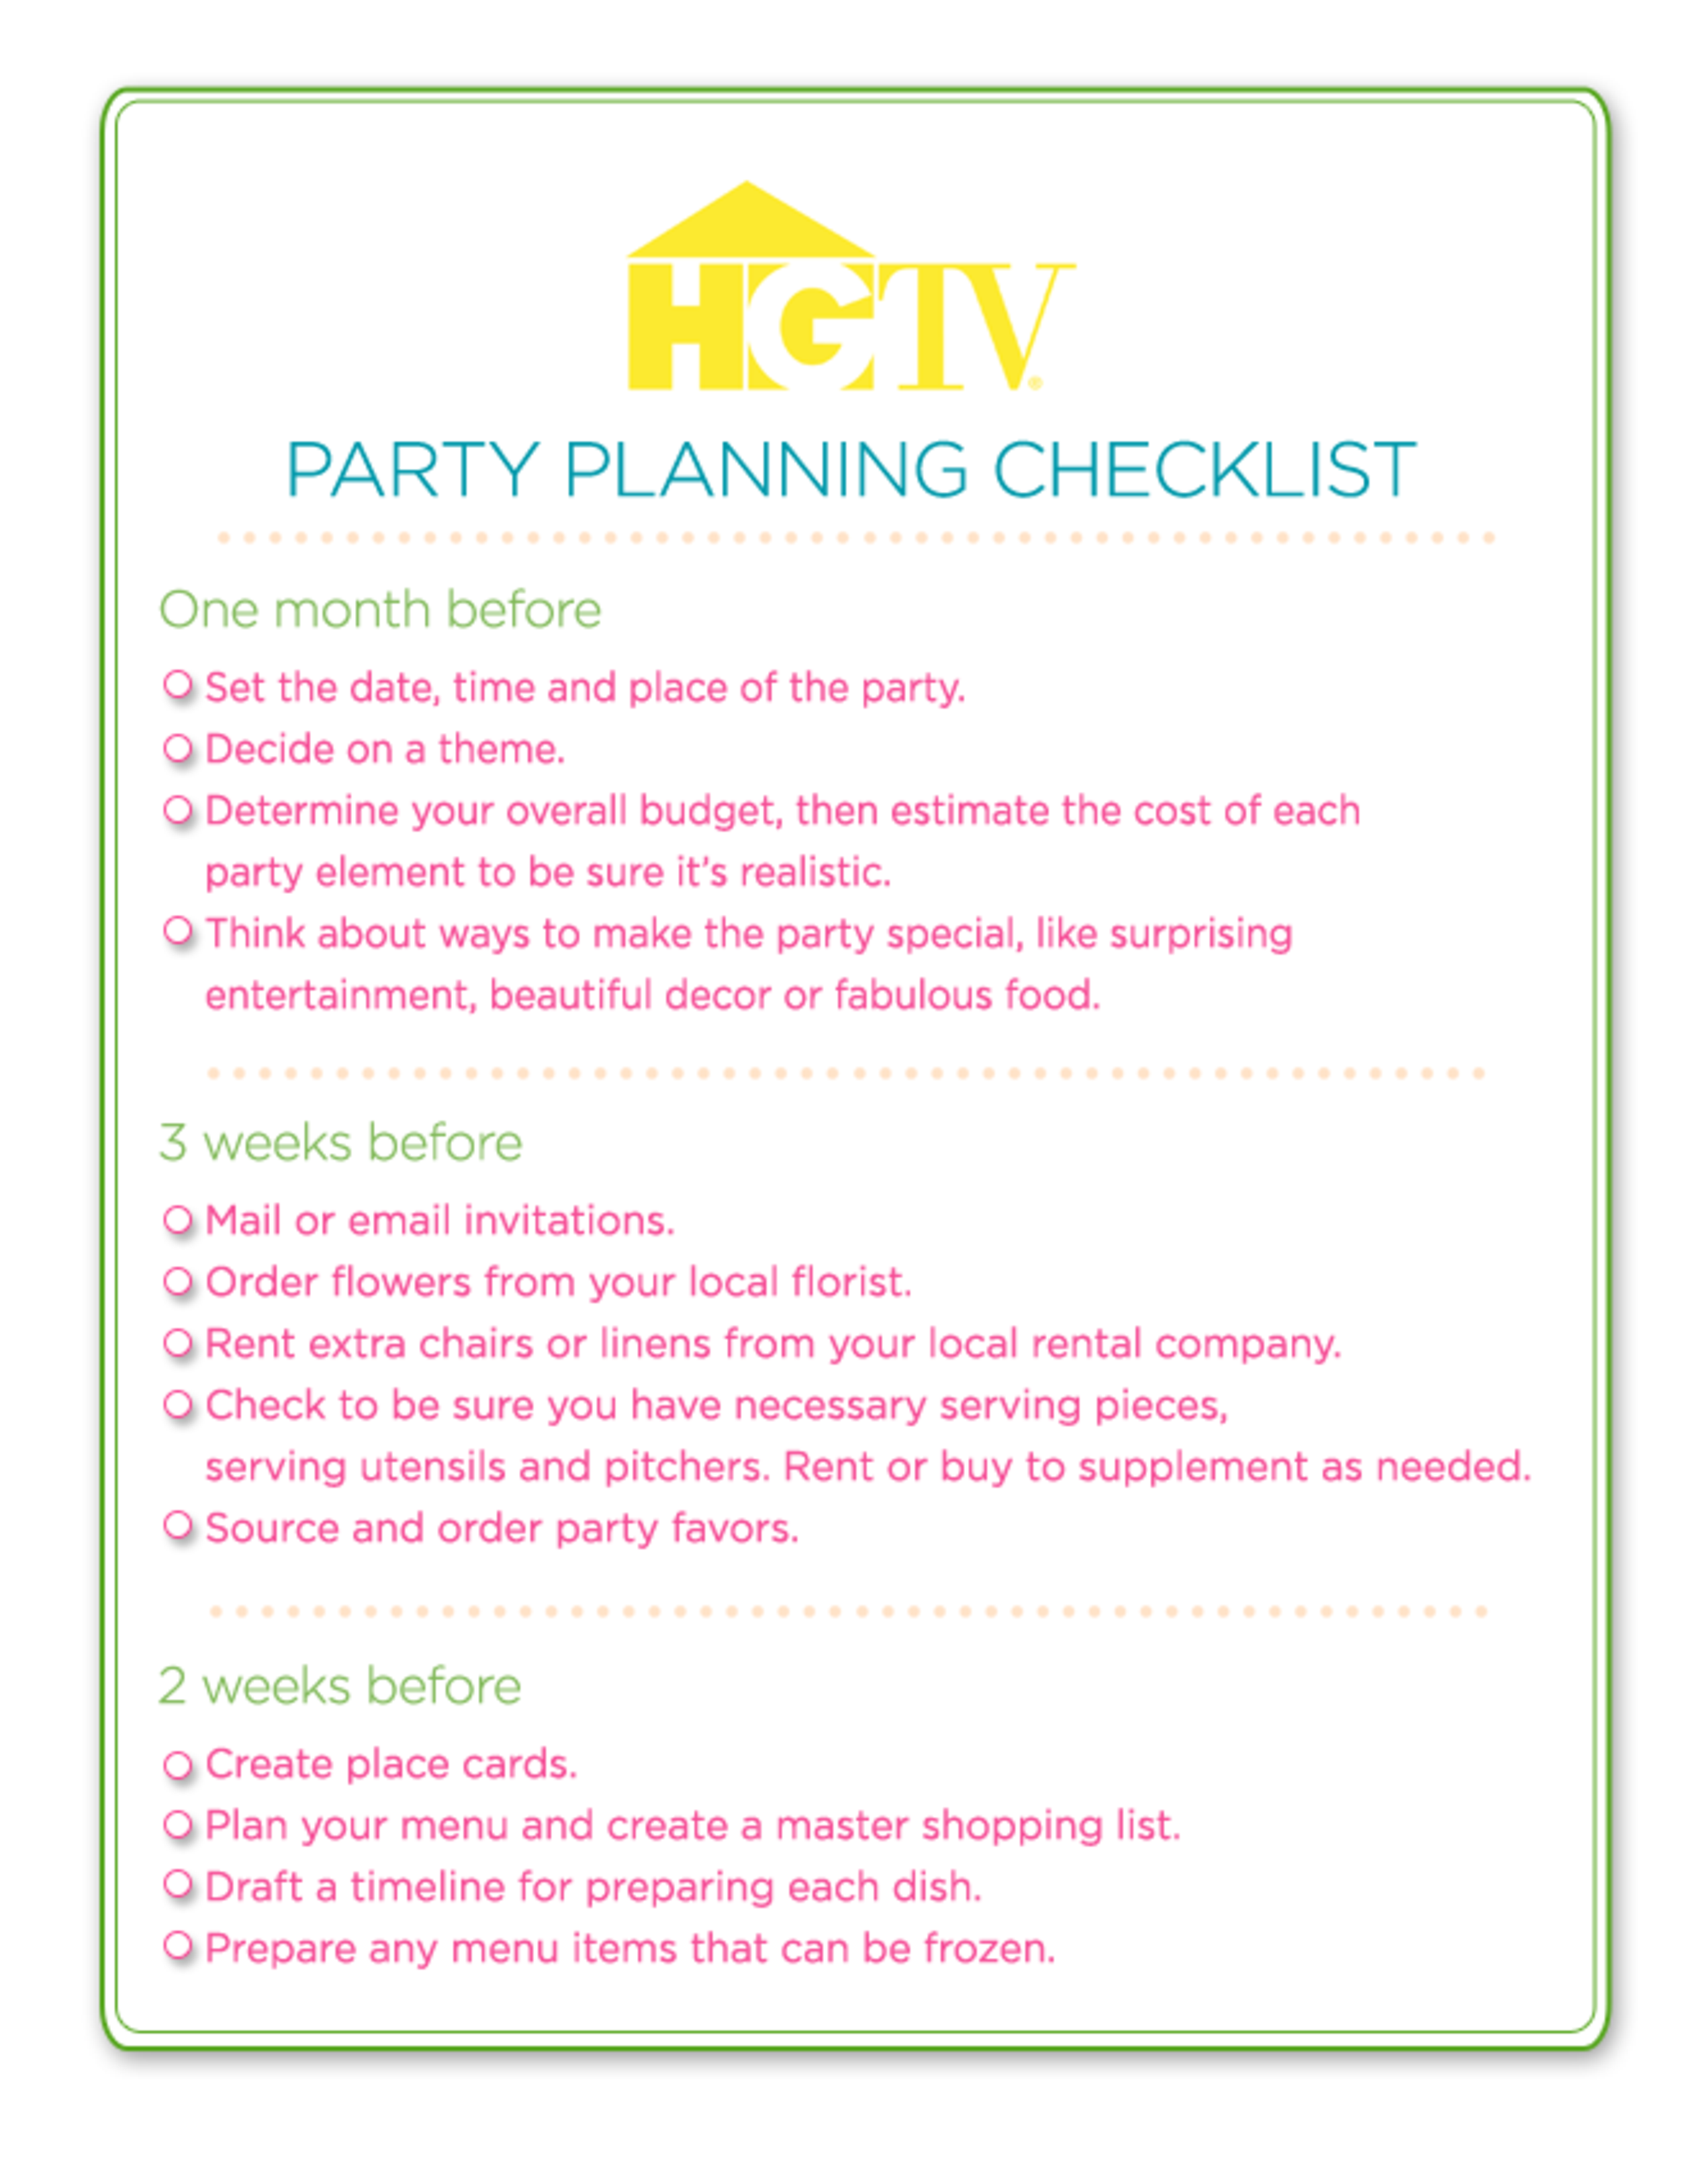 Party Planning Checklist template 模板